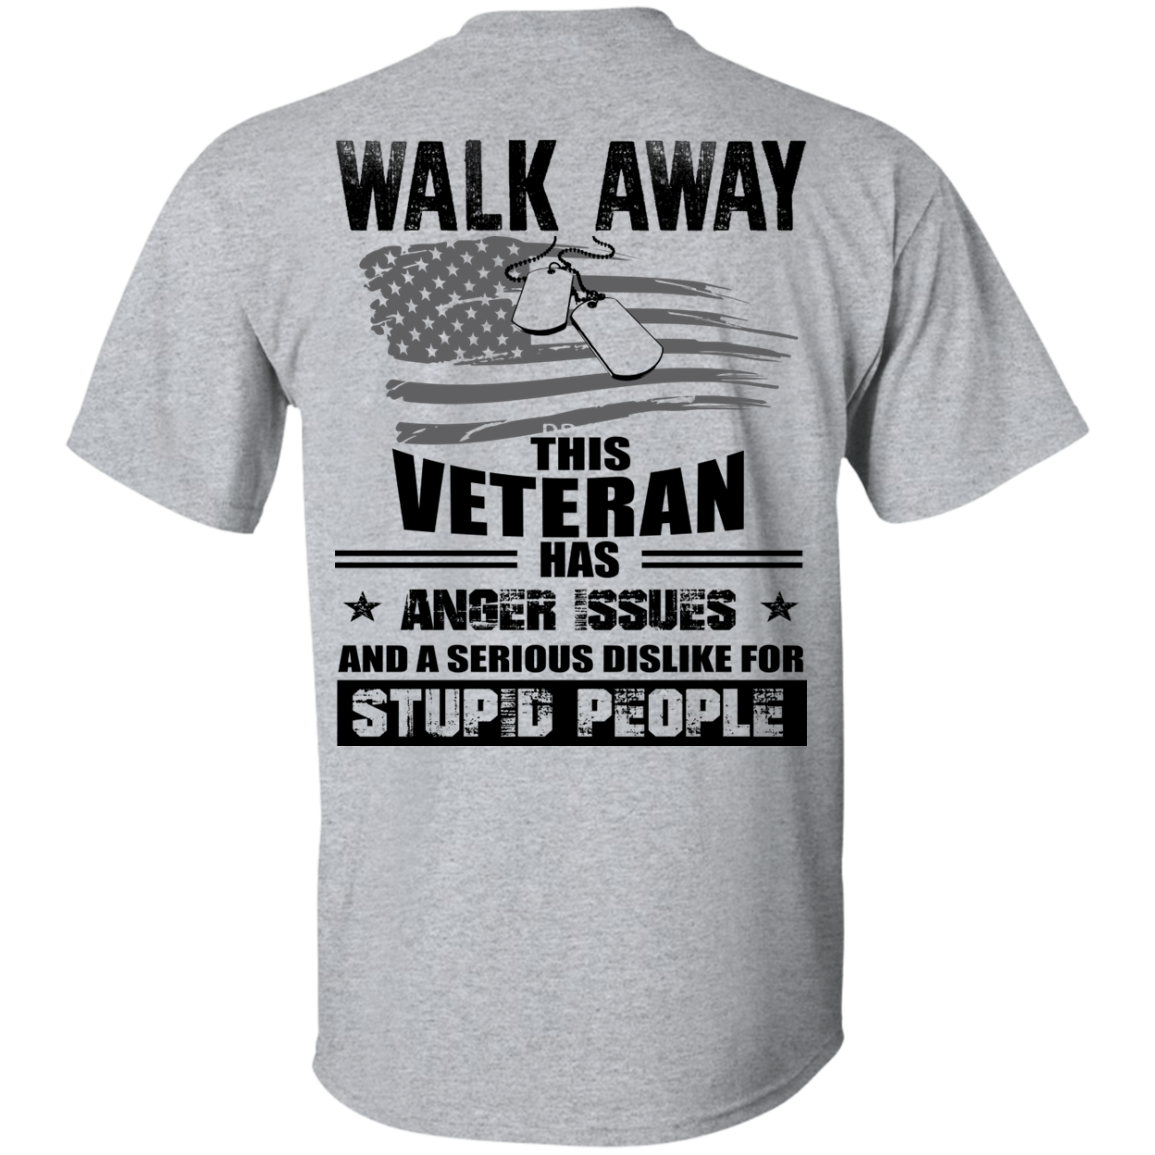 Walk Away This Veteran Has Anger Issuse for Stupid People T-shirts